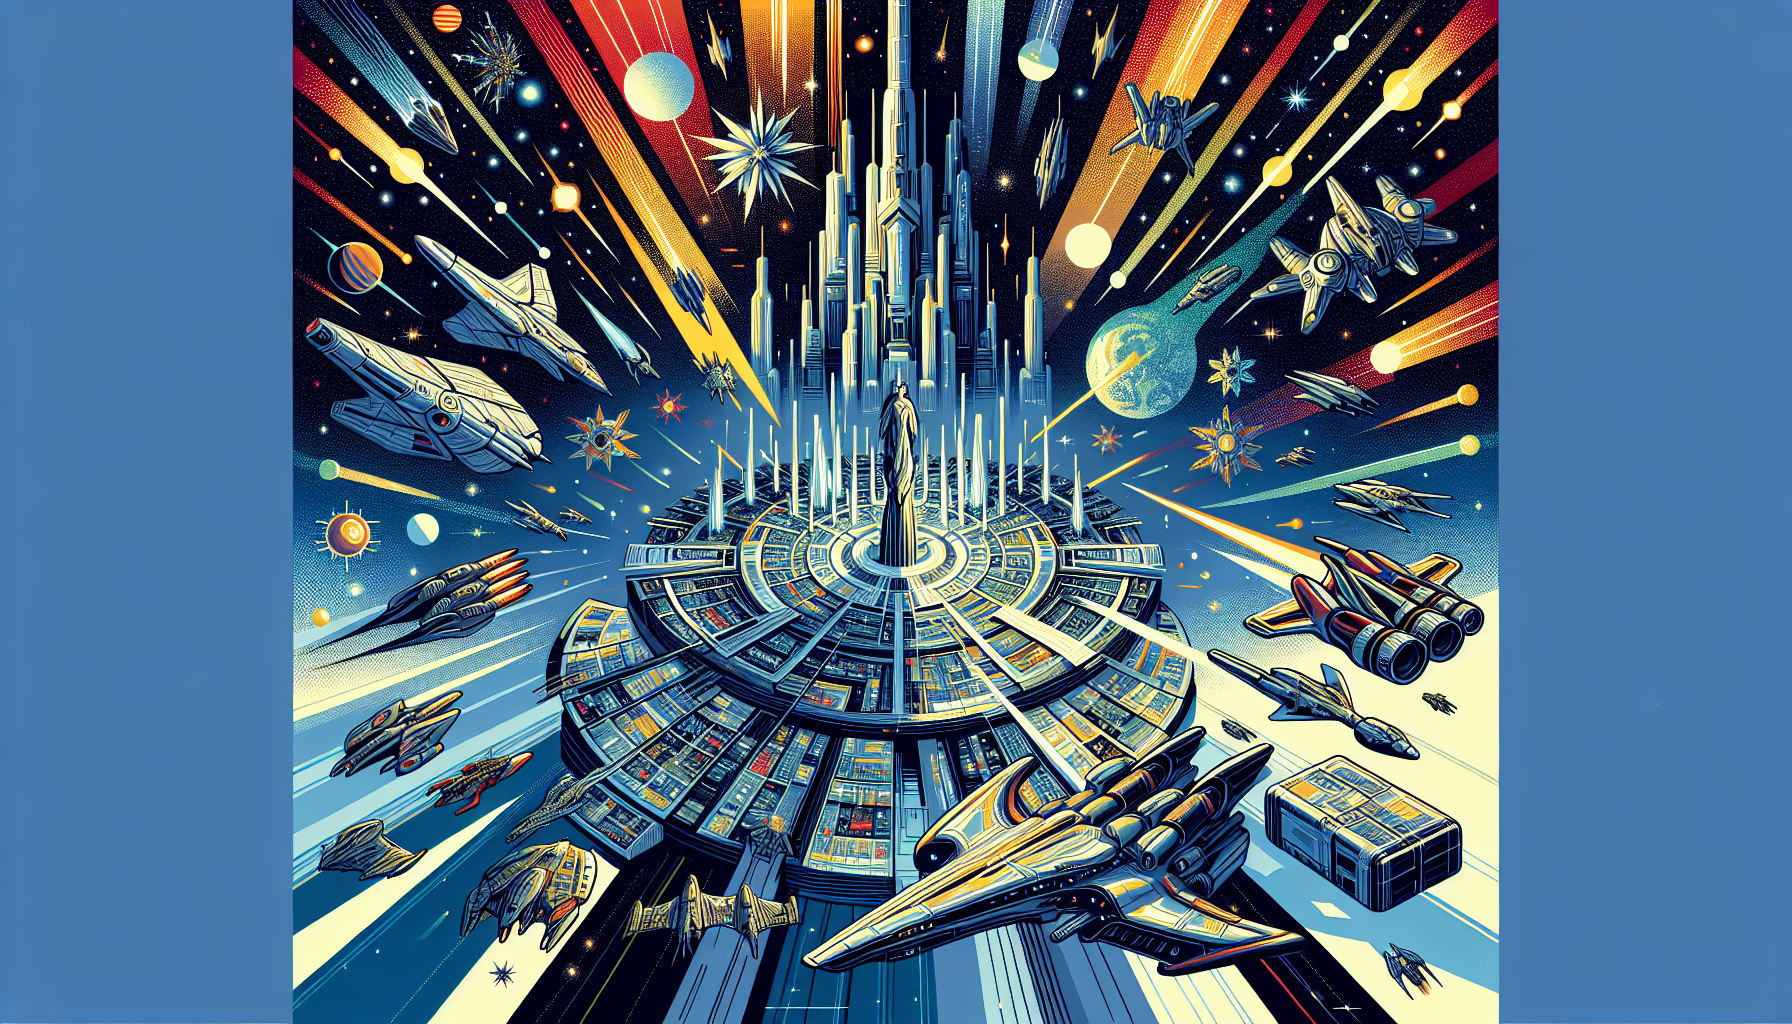 Create a detailed illustration that visually represents the growth and development of a fictional galactic empire. Use a futuristic and modern style, incorporating elements reminiscent of popular space opera series such as extensive star systems, intricate spacecraft designs, towering headquarters, galactic battles, and diverse alien species. Highlight the vibrant color palette for a pop culture twist. No text should be included in the image. Note that we are not replicating any specific copyrighted series, but drawing inspiration from space-opera genre in general.